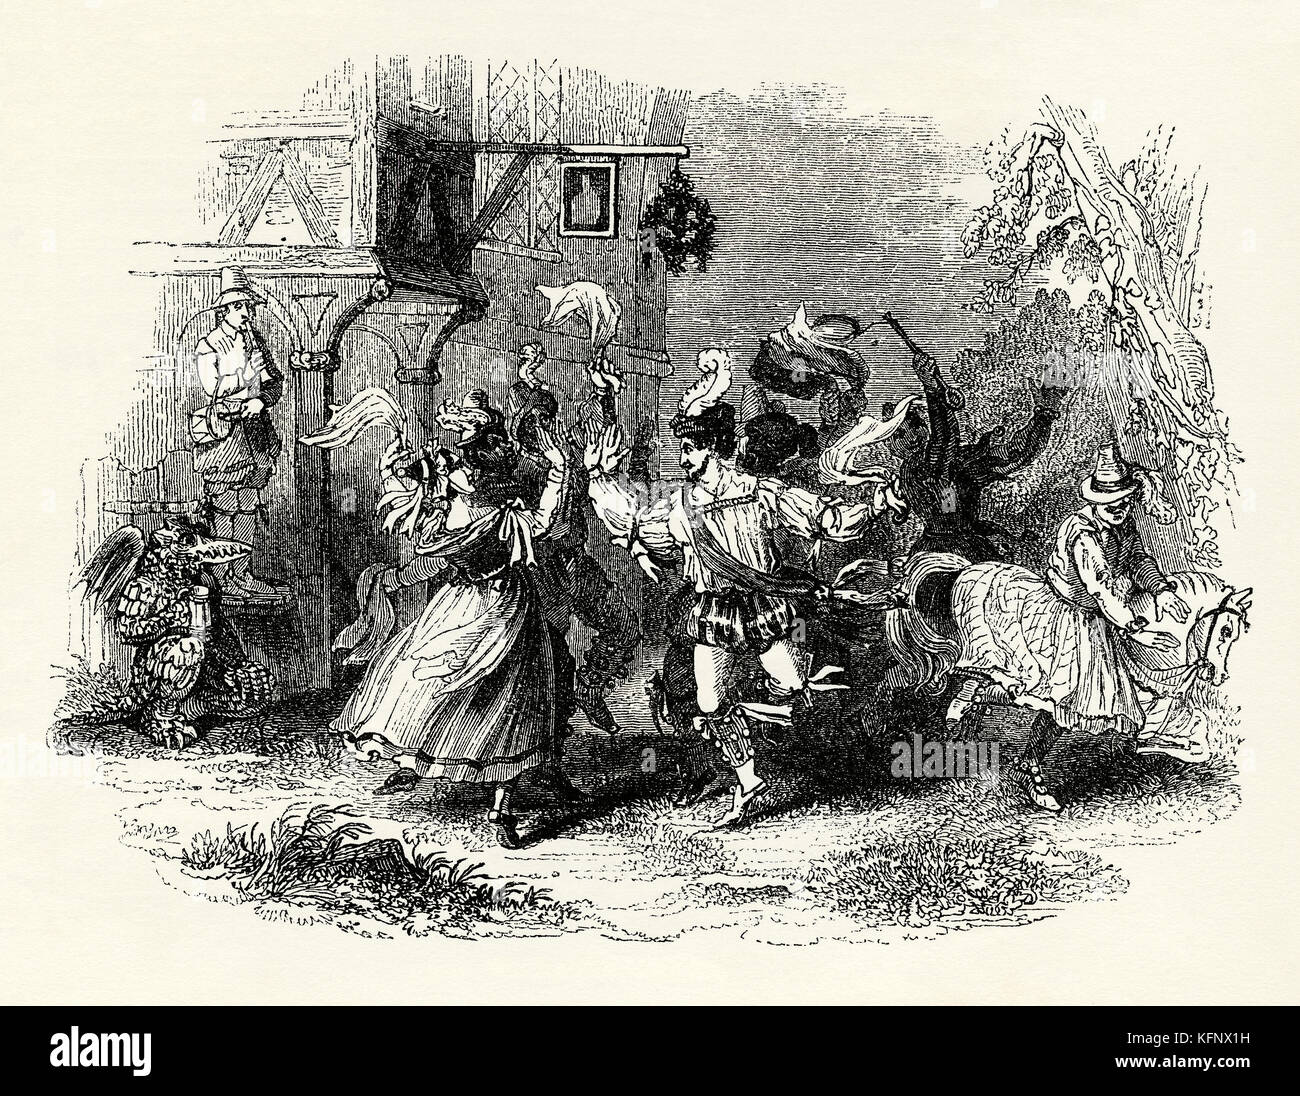 An old engraving of Morris dancing, an early form of English folk dance usually accompanied by music. One man in this illustration wears a hobby horse and a musician is seen on the left Stock Photo